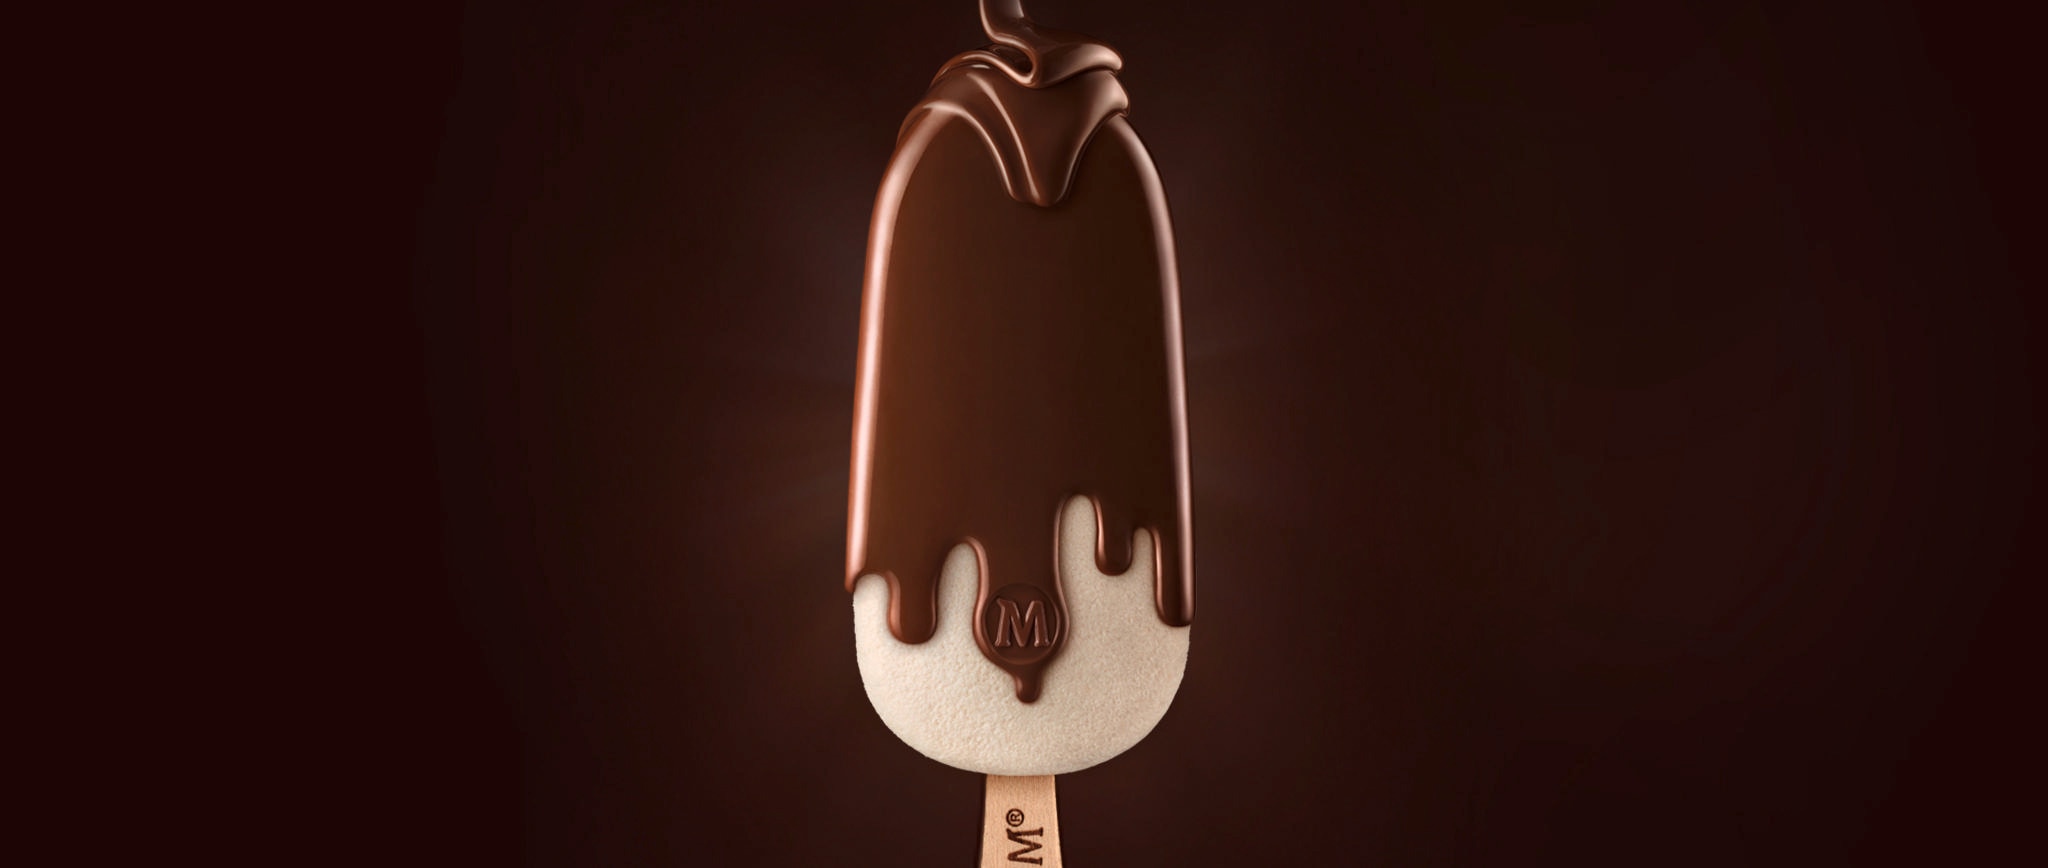 Magnum products image